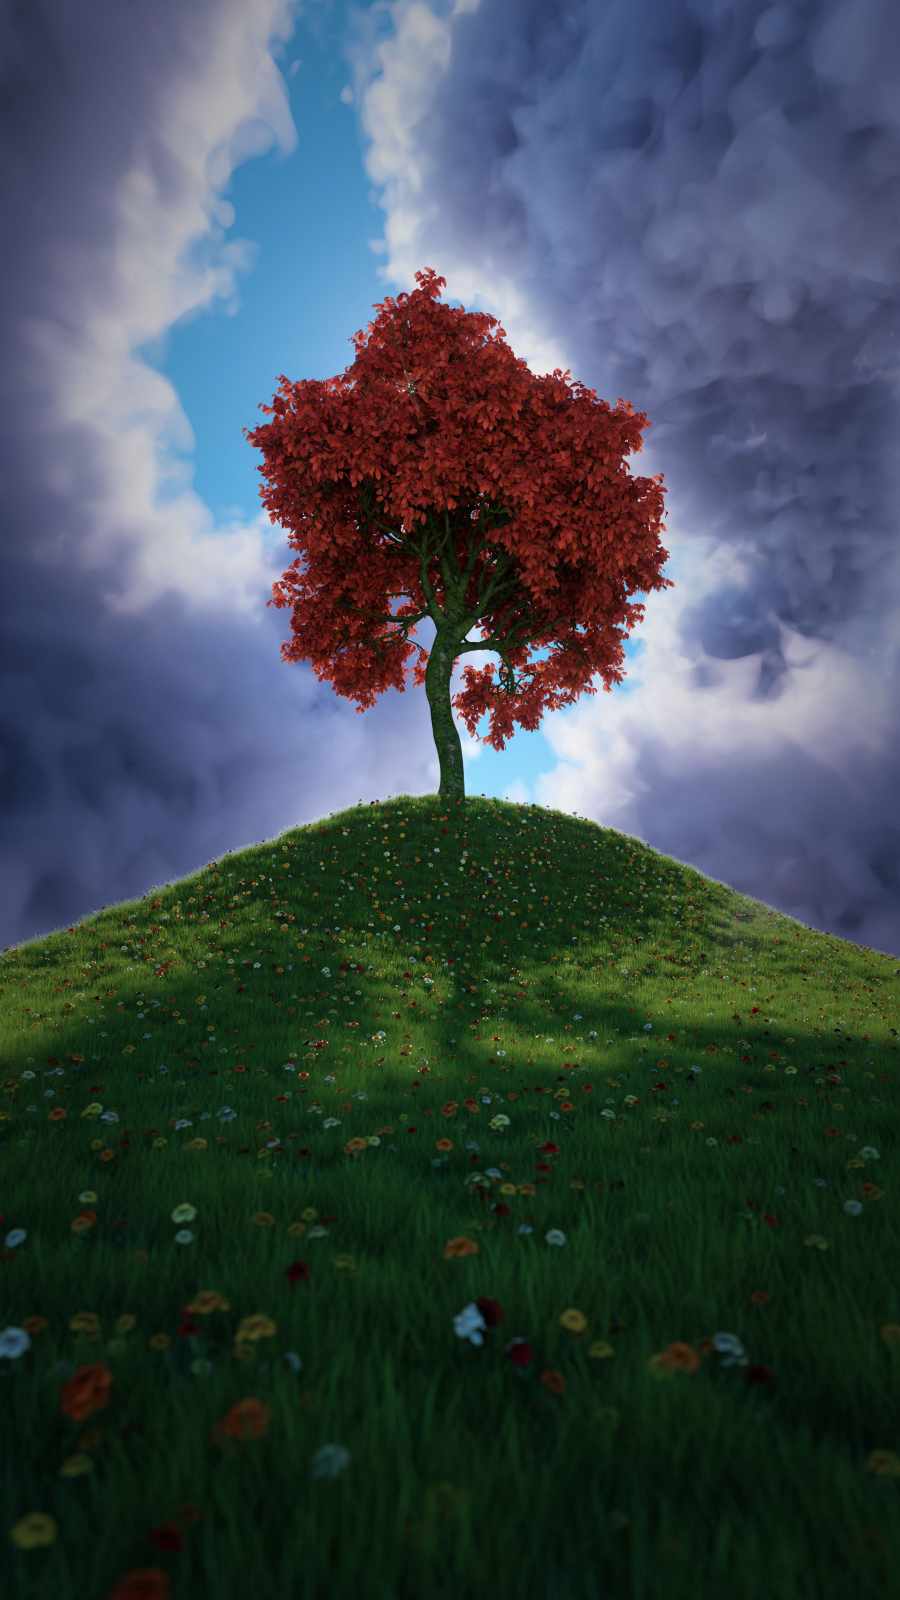 Share 67+ tree of life wallpaper best - in.cdgdbentre